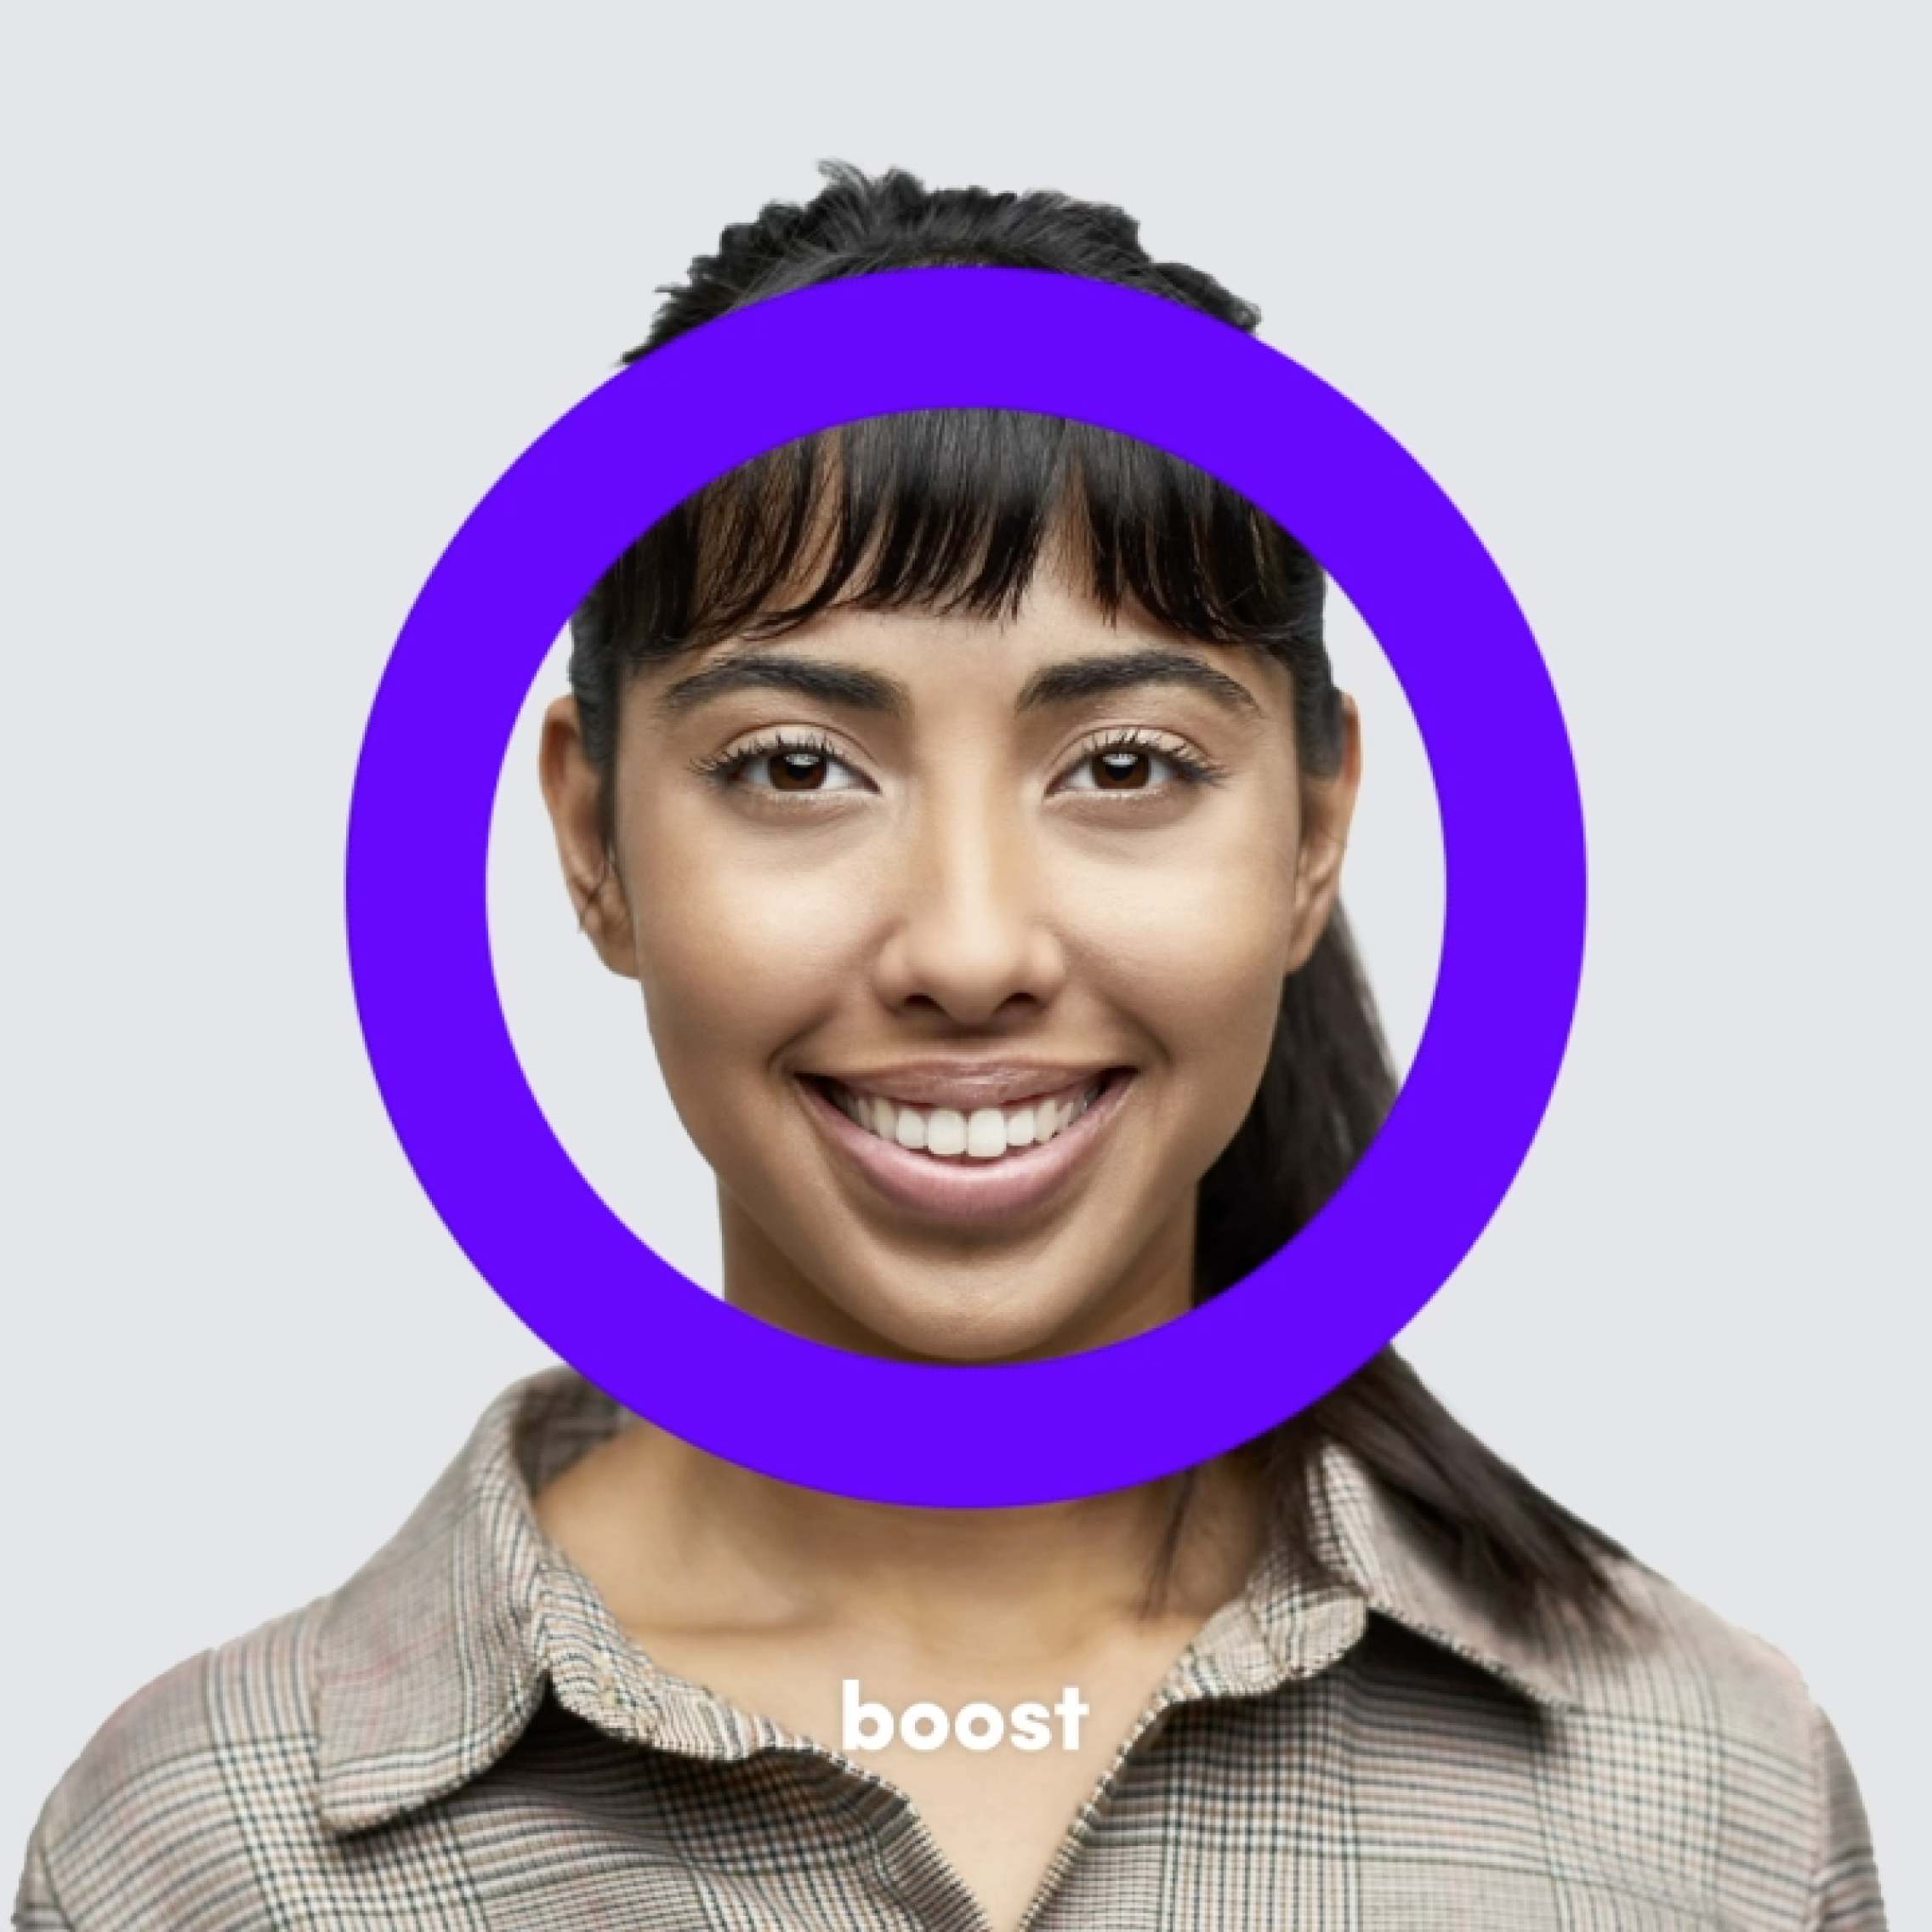 woman-smiling-with-purple-circle-in-front boost